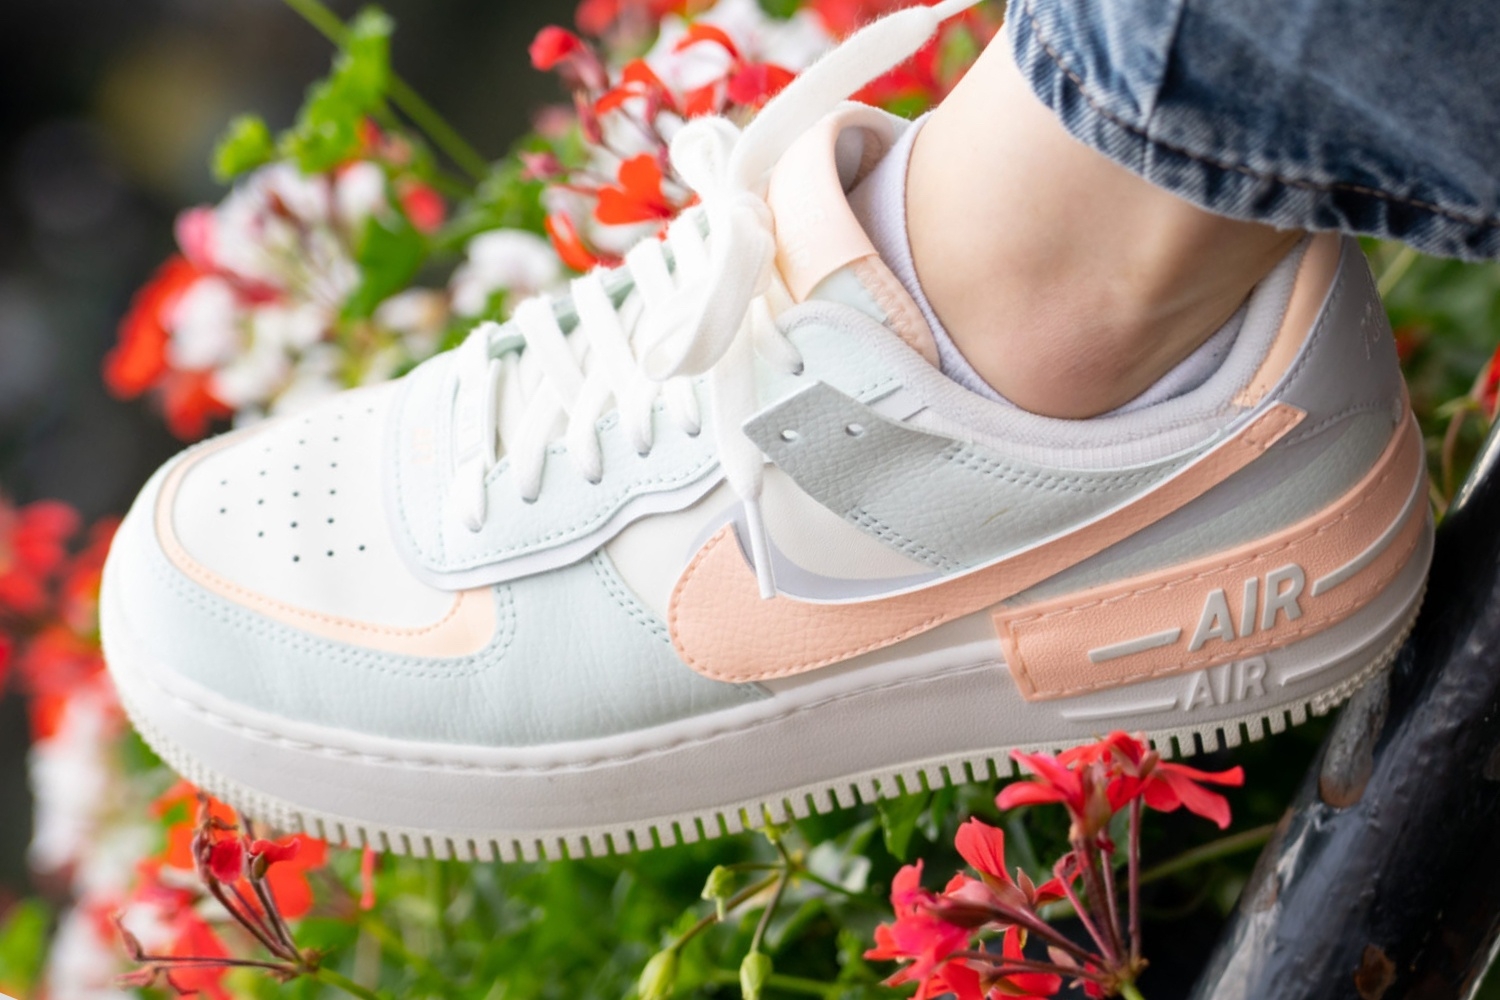 Nike Air Force 1 WMNS Modelle - unsere Top Picks